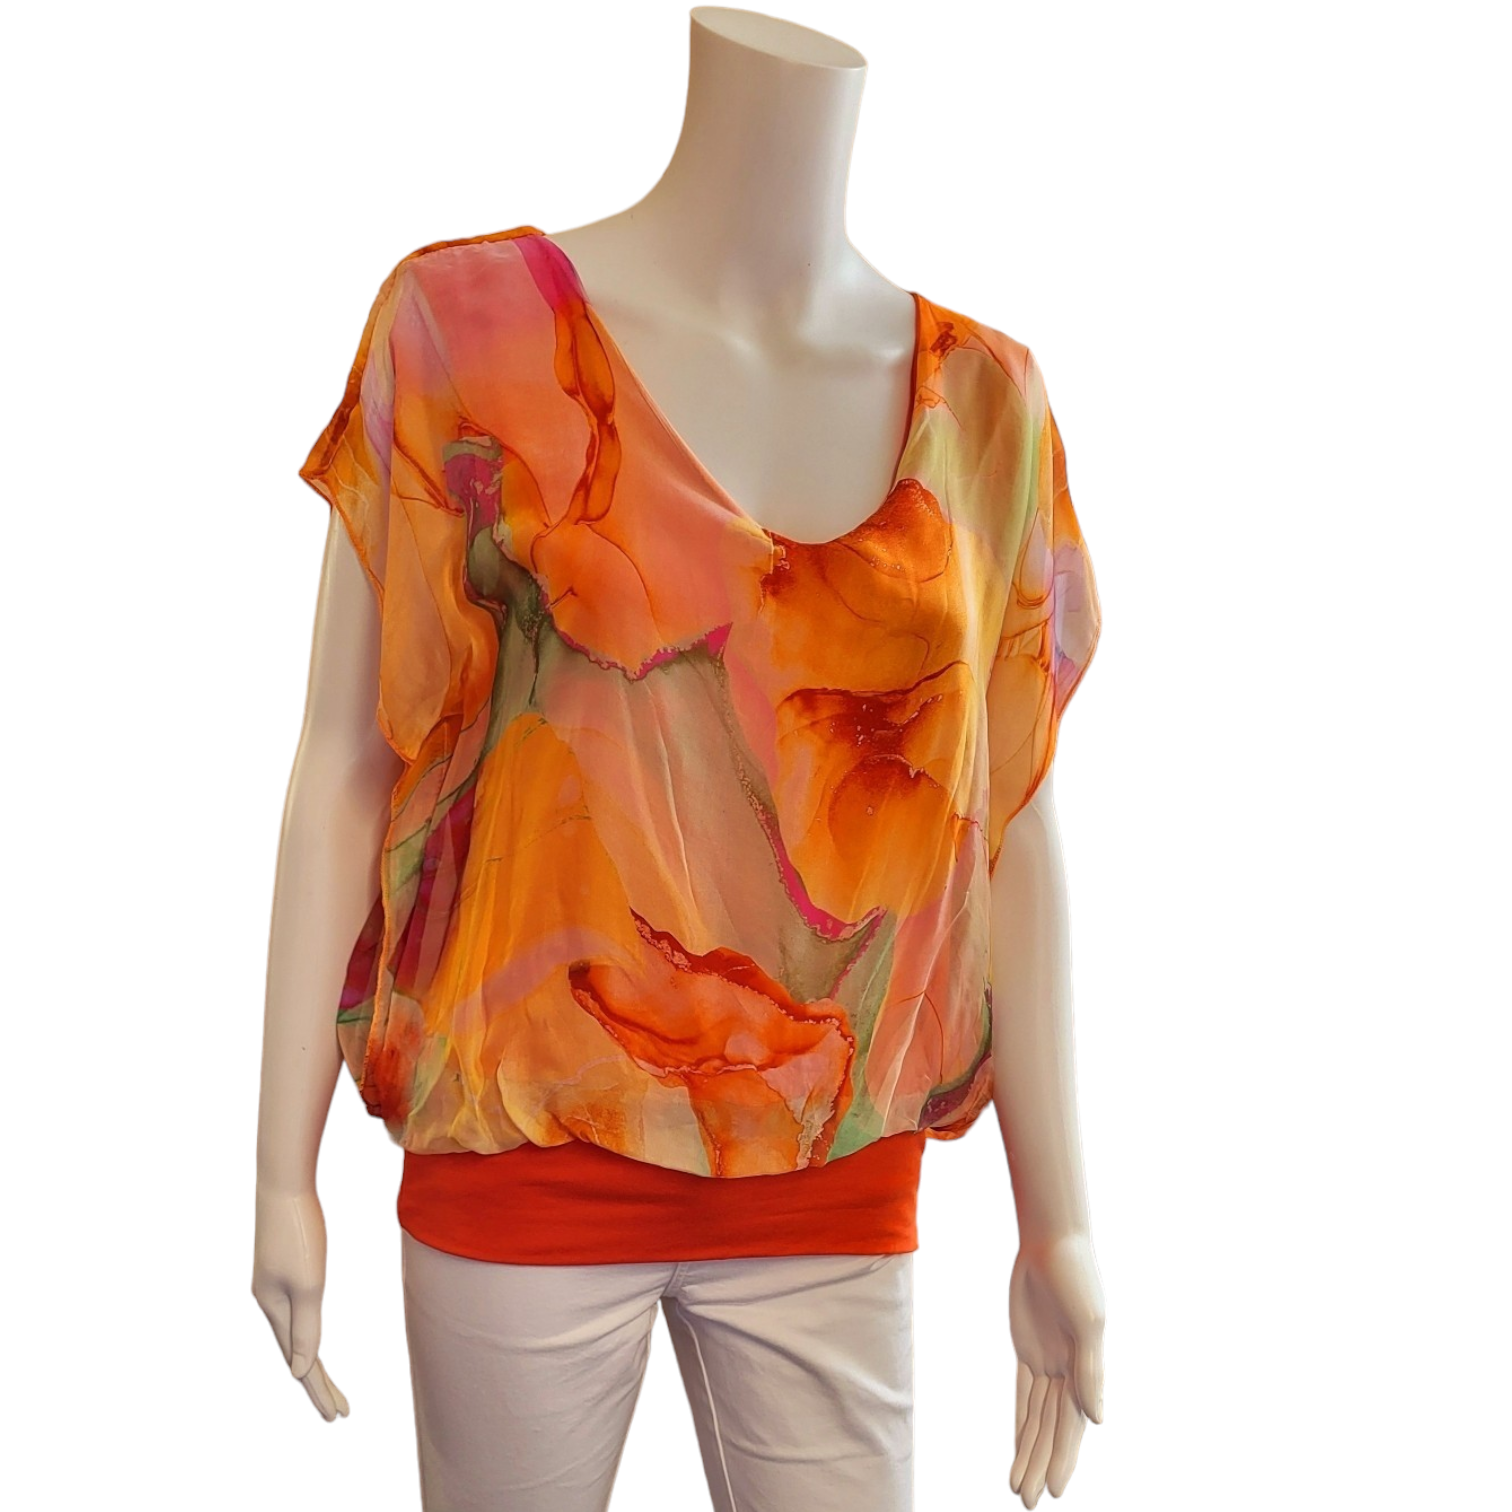 orange top in a silky material with orange elasticated band around the bottom. short sleeves and v neck, abstract design